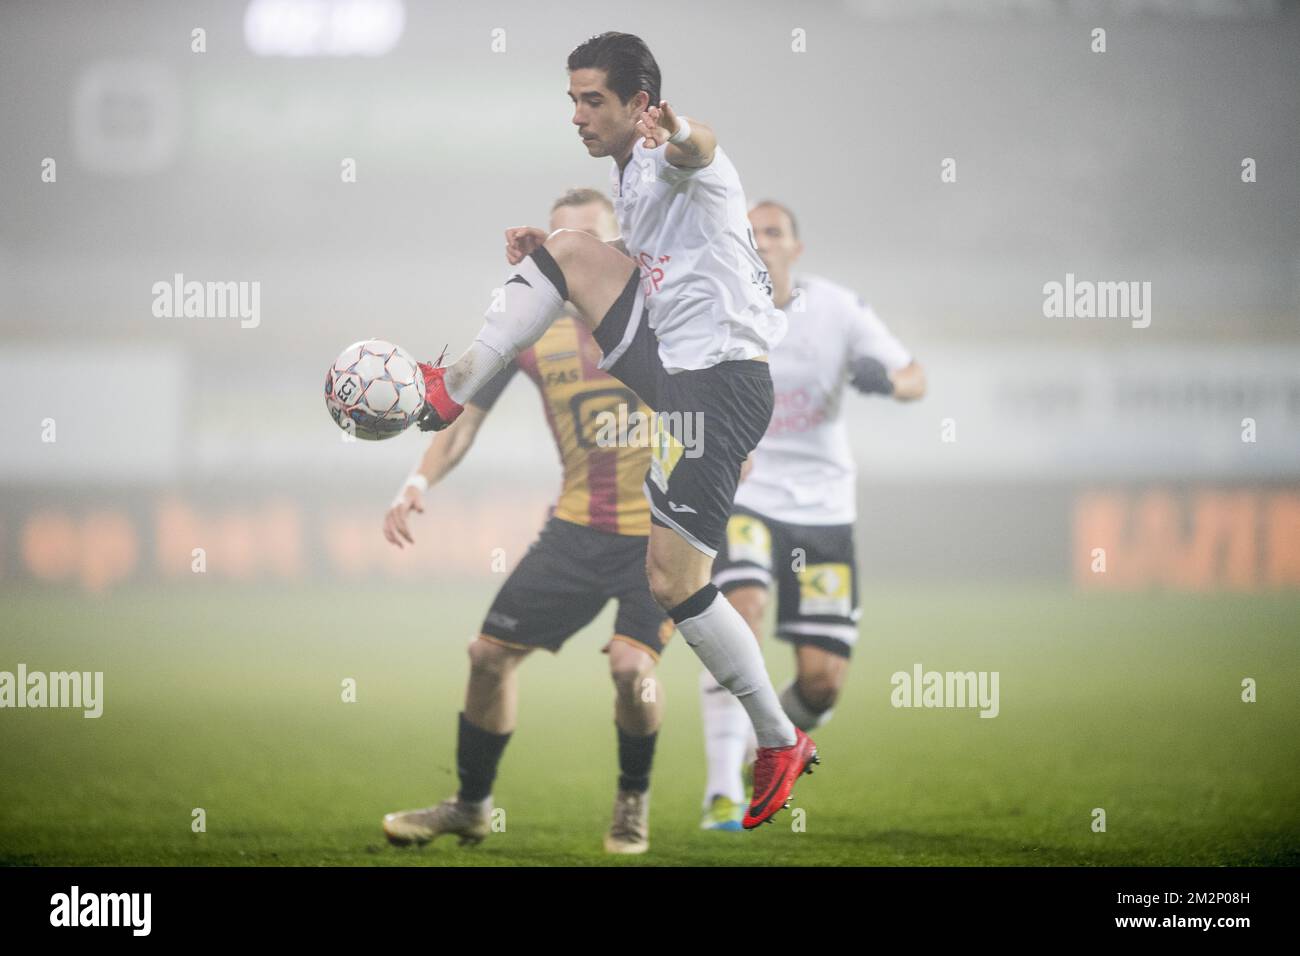 Roeselare's Andrei Camargo pictured in action during a soccer game between KV Mechelen and Roeselare, Friday 18 January 2019 in Mechelen, on the 22nd day of the 'Proximus League' 1B division of the Belgian soccer championship. BELGA PHOTO JASPER JACOBS Stock Photo